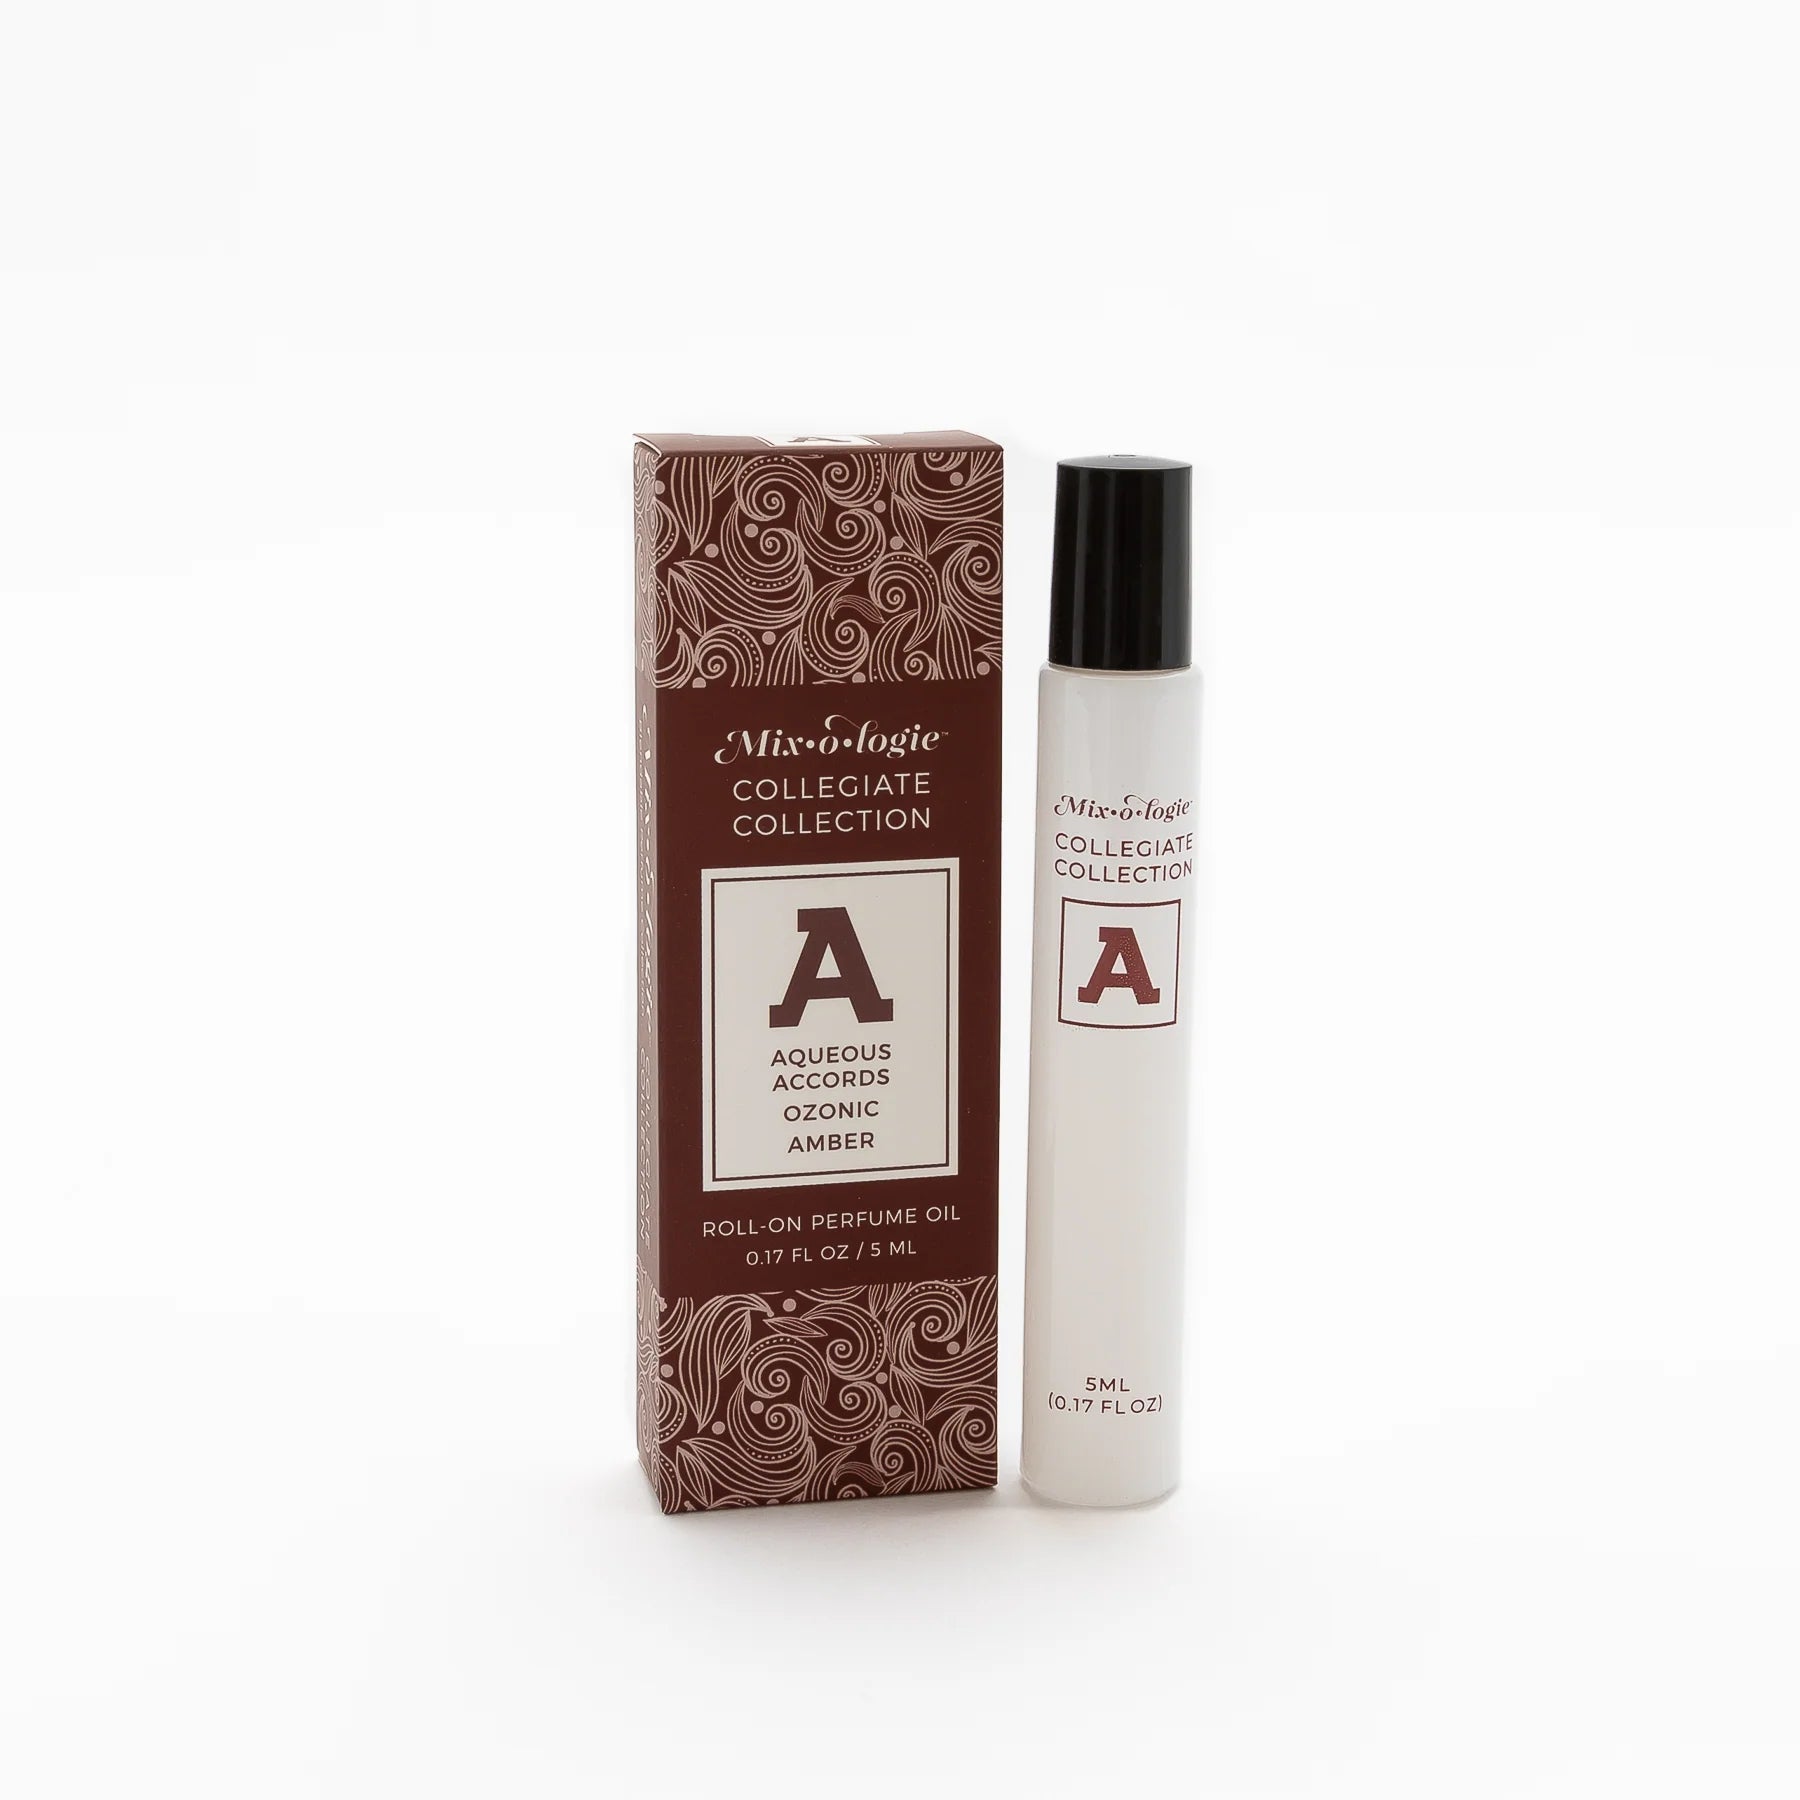 Mixologie - Scent "A" Rollerball Perfume